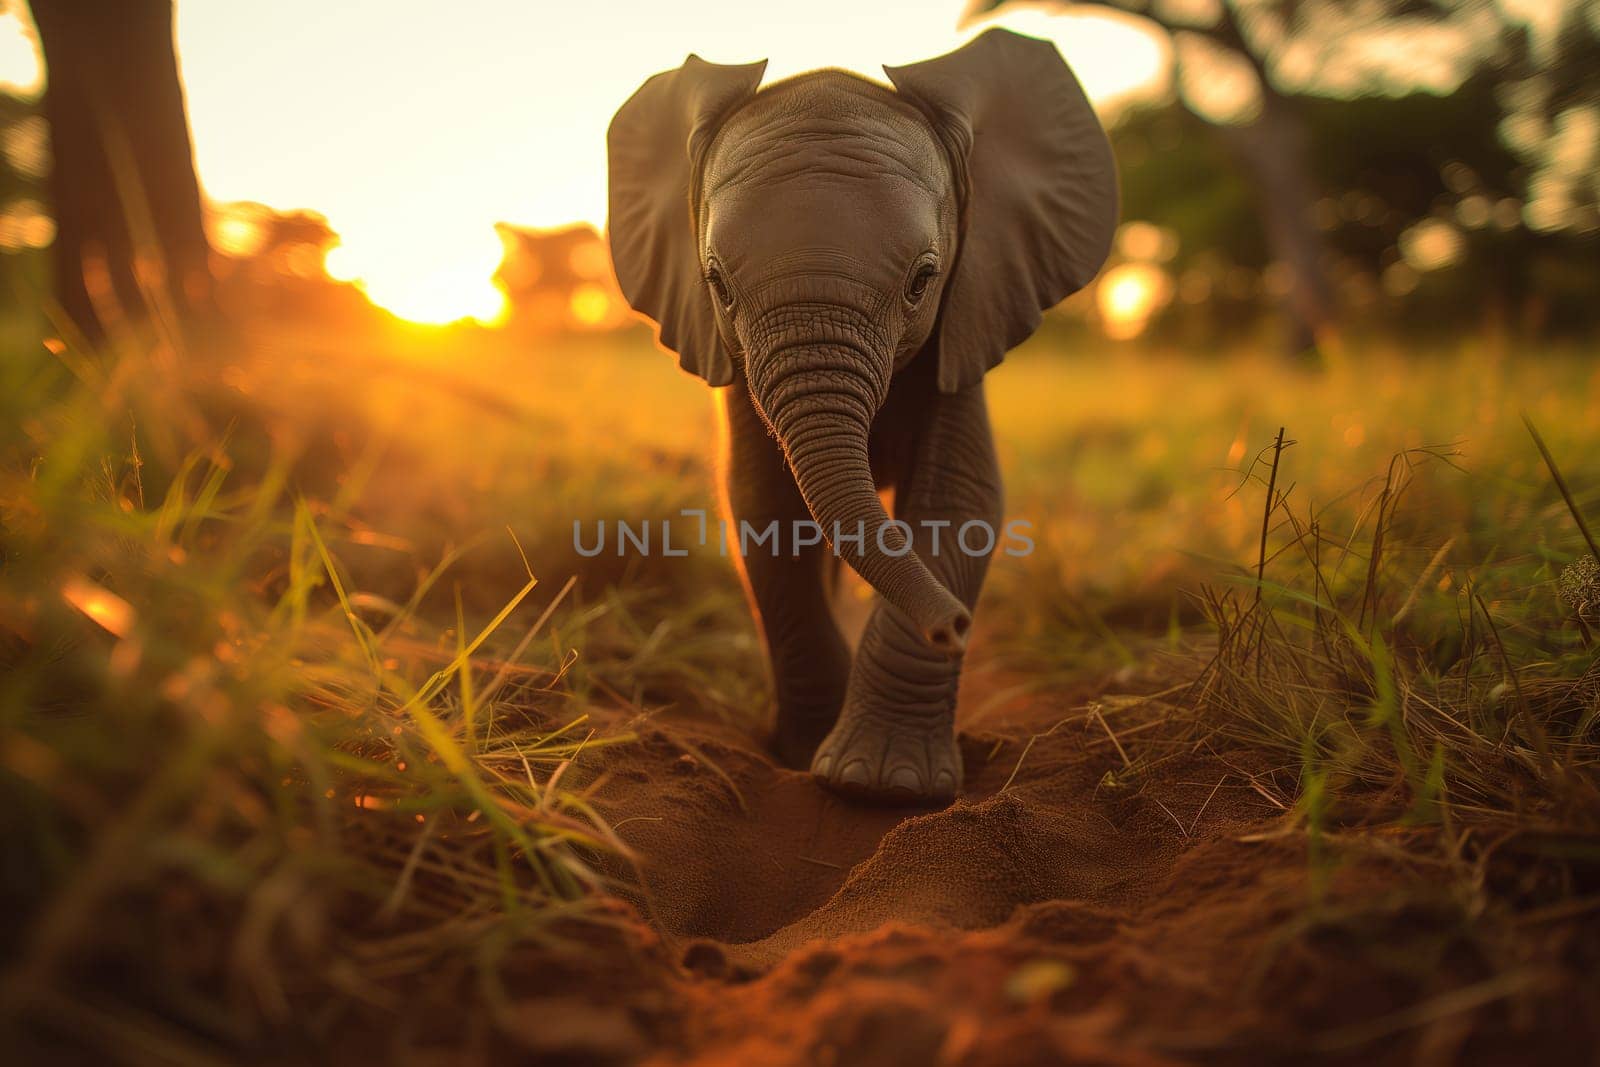 A Baby Elephant in the Wild by dimol